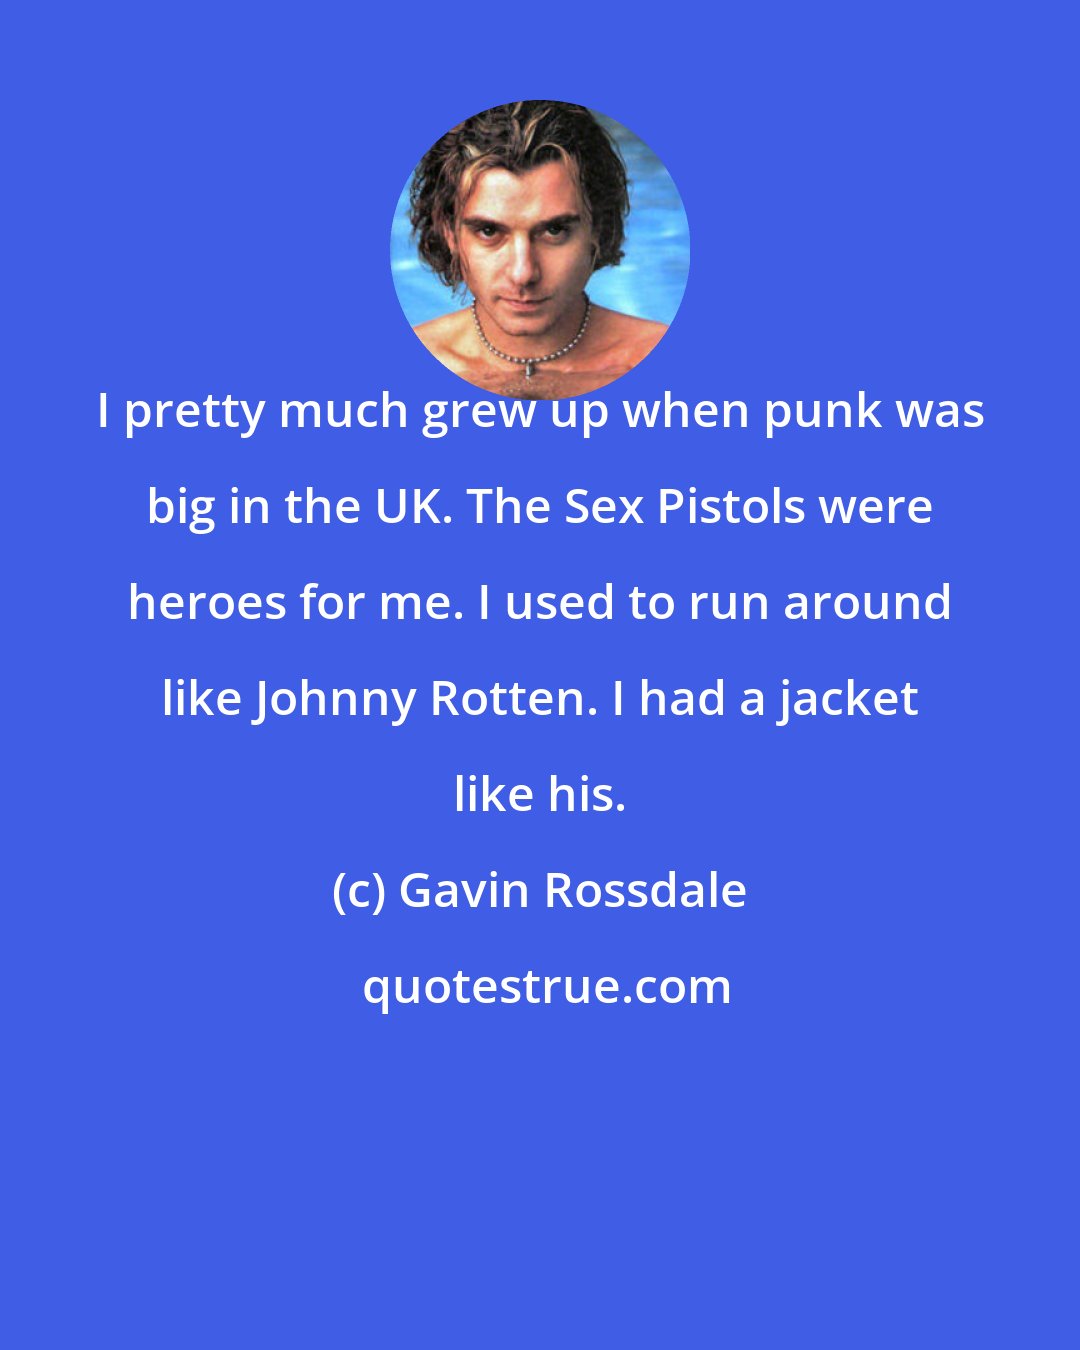 Gavin Rossdale: I pretty much grew up when punk was big in the UK. The Sex Pistols were heroes for me. I used to run around like Johnny Rotten. I had a jacket like his.